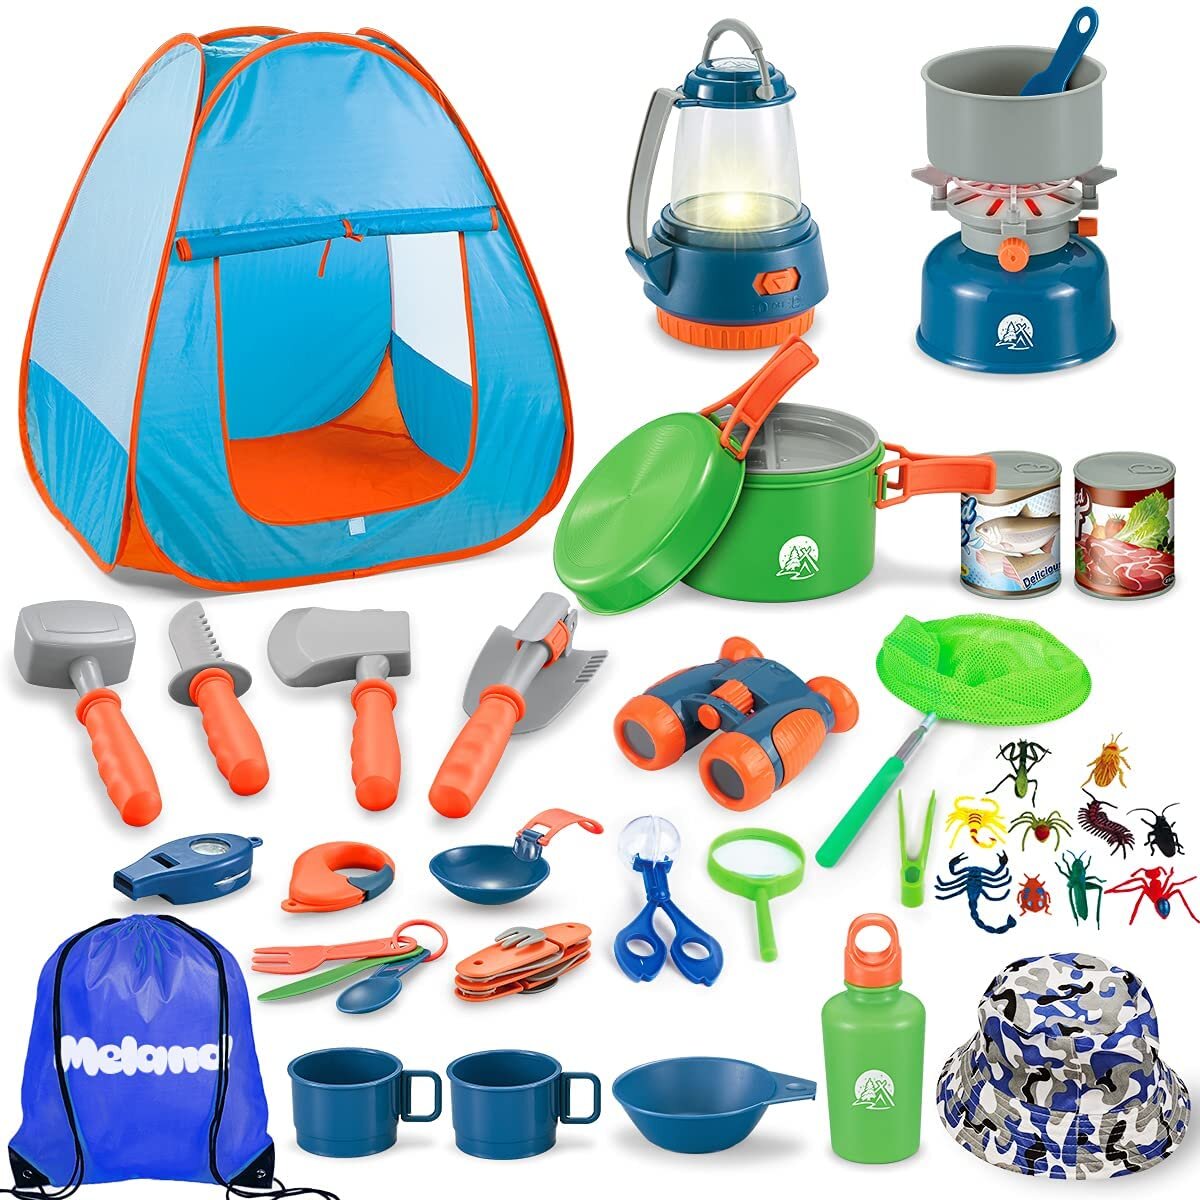 45 Best Fun and Outdoorsy Camping Gifts for Kids - In The Playroom